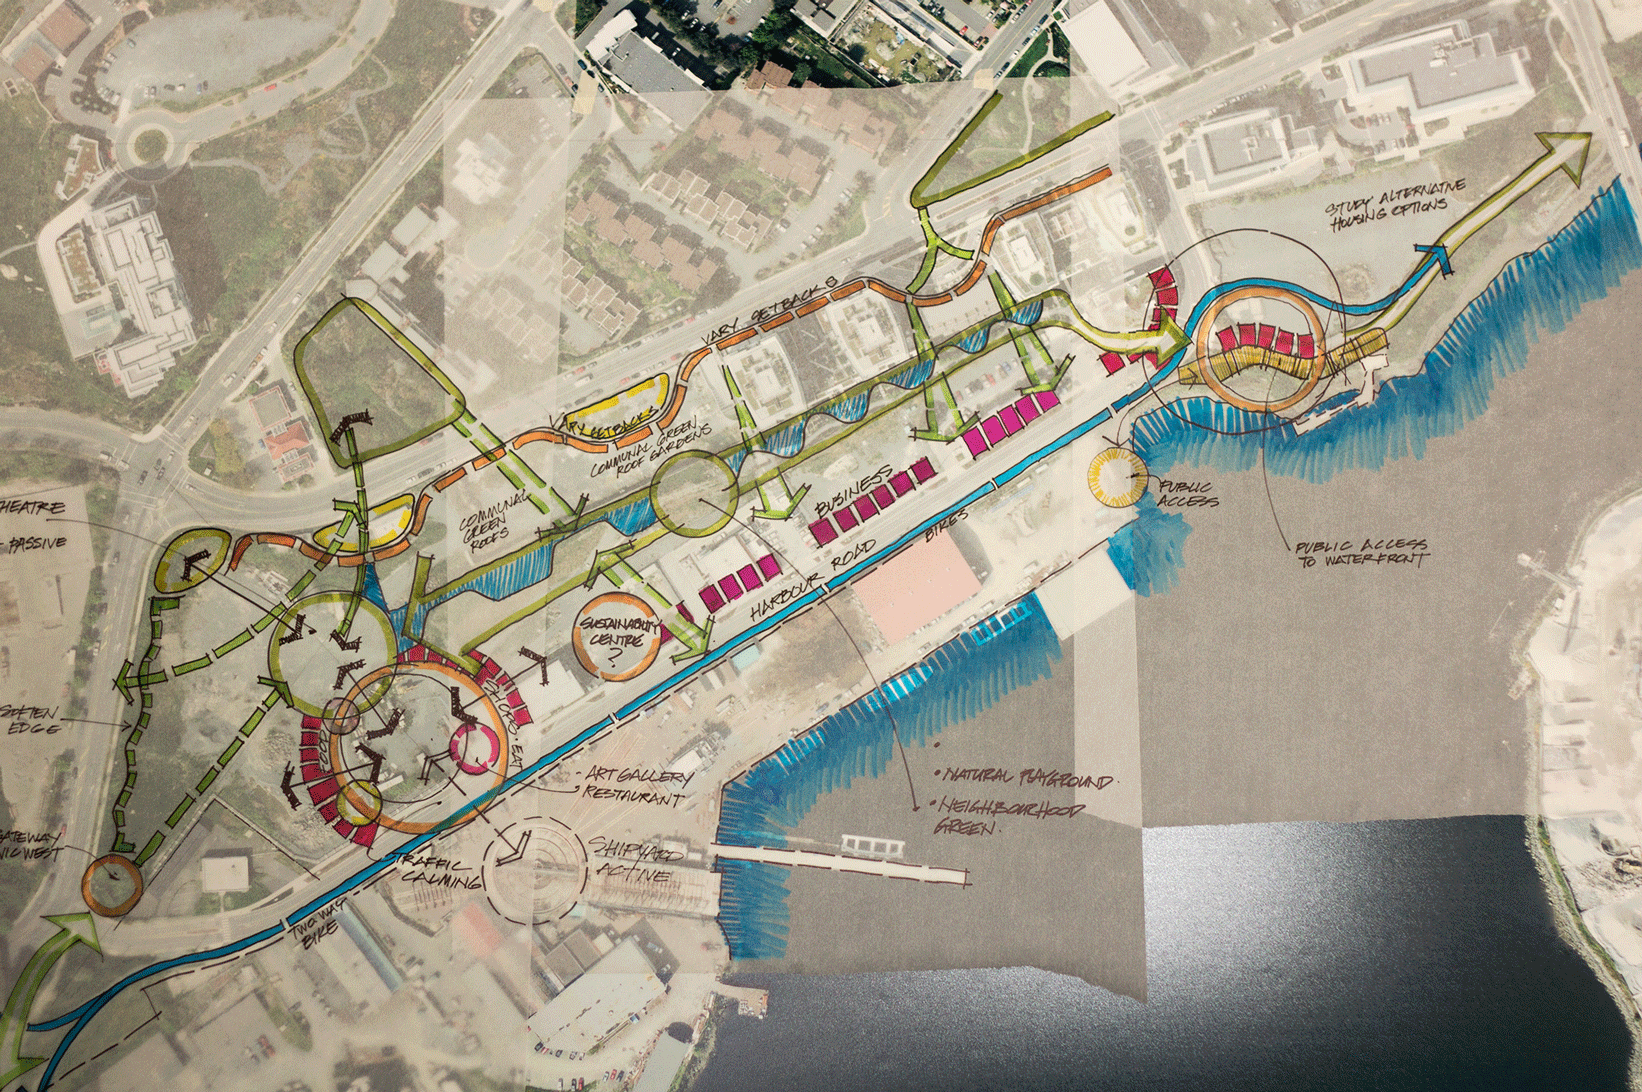  Map of Dockside Green Site